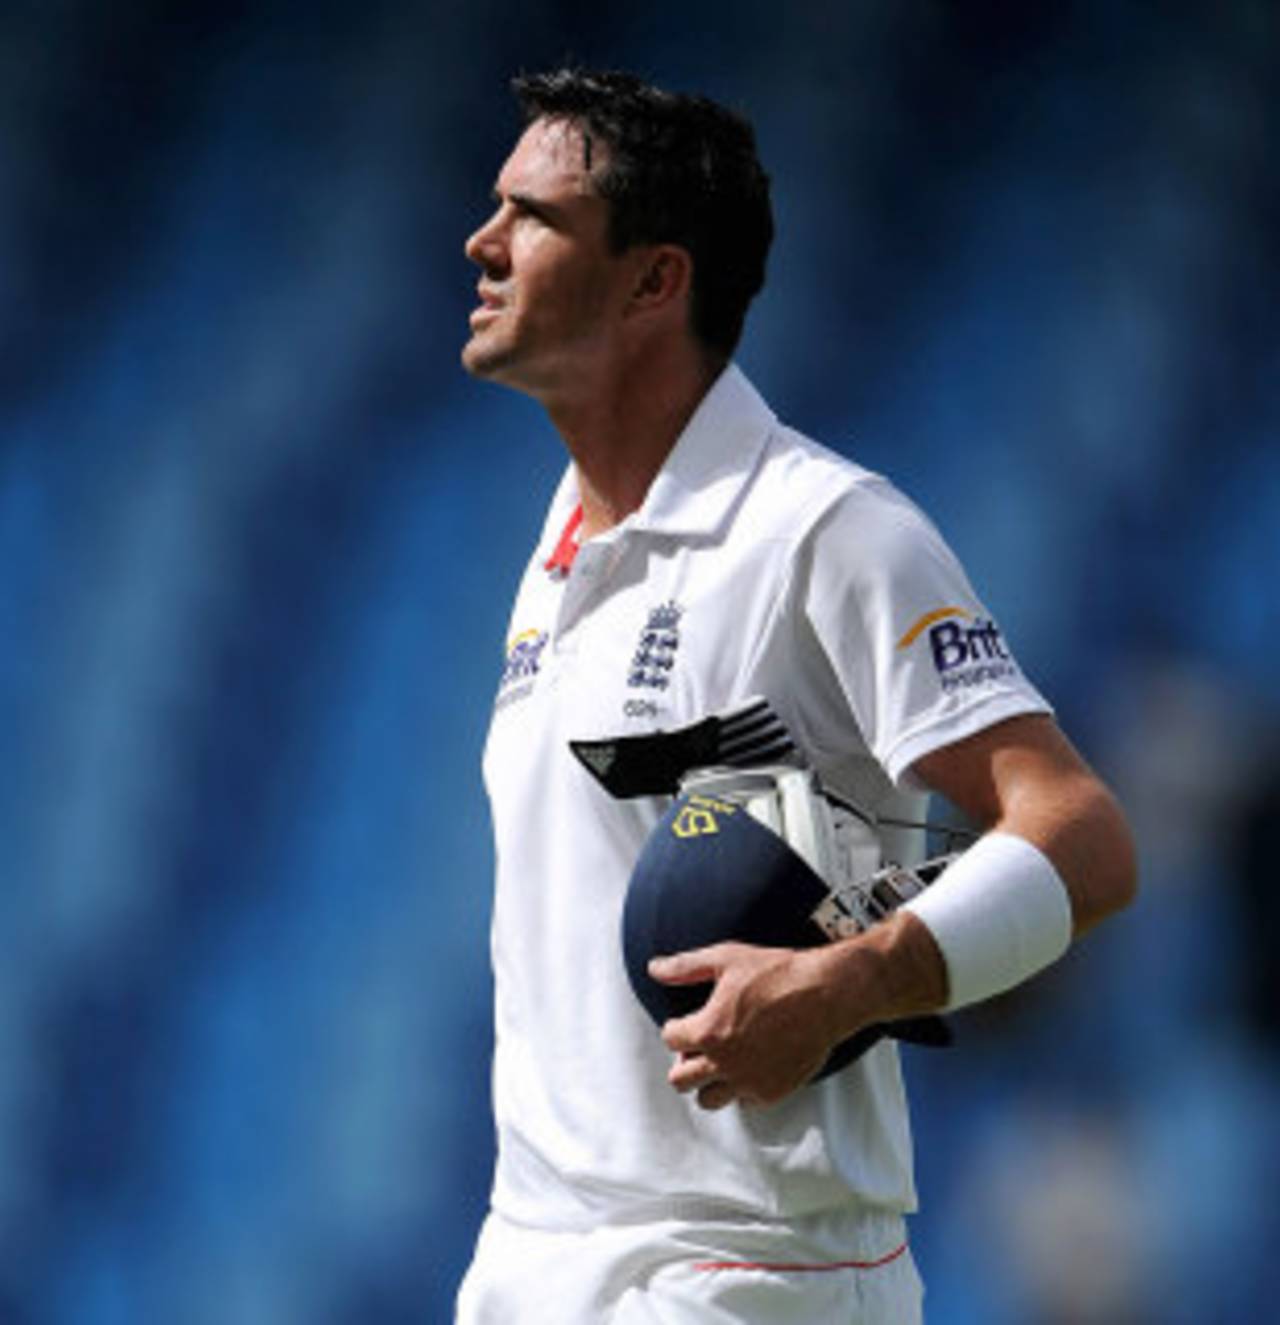 Kevin Pietersen walks back after another failure, Pakistan v England, 3rd Test, Dubai, 4th day, February 6, 2012 